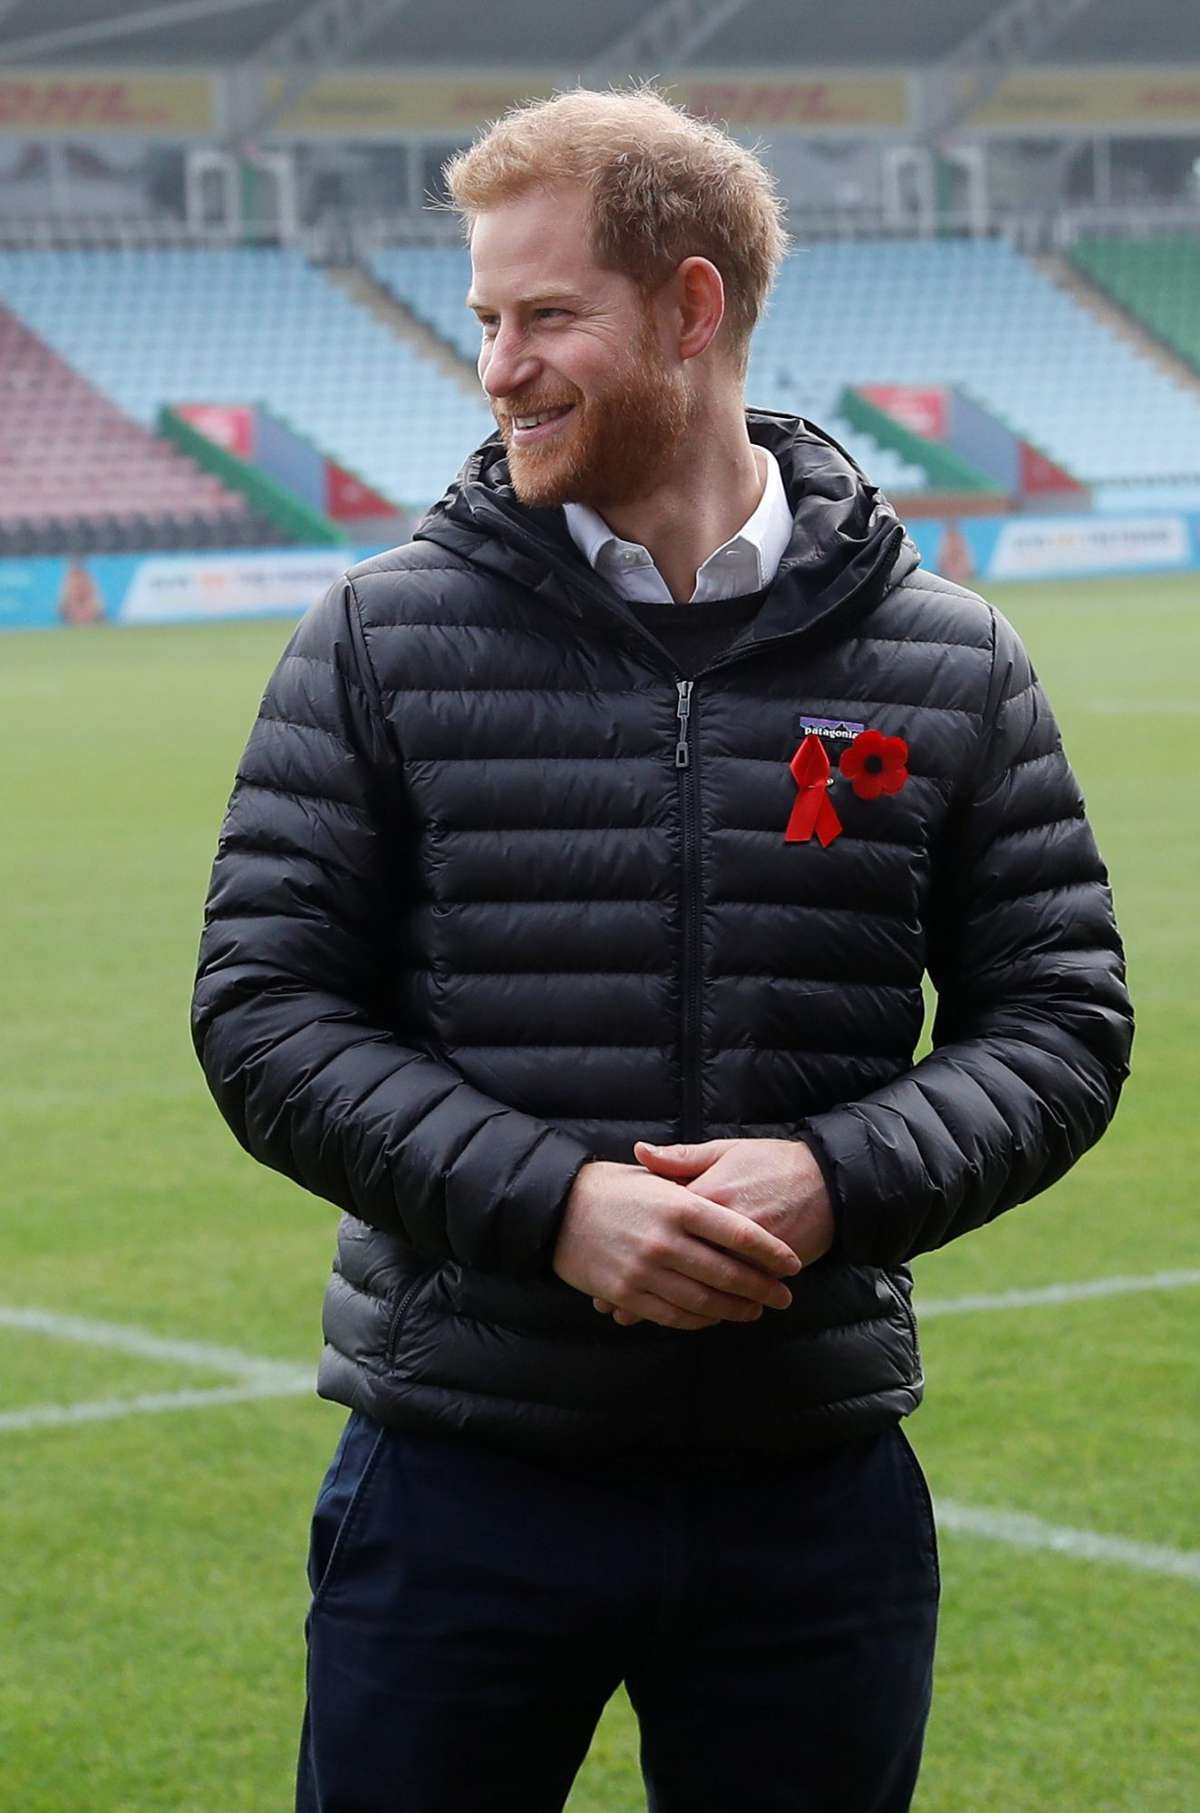 Prince Harry Rugby Visit Lead